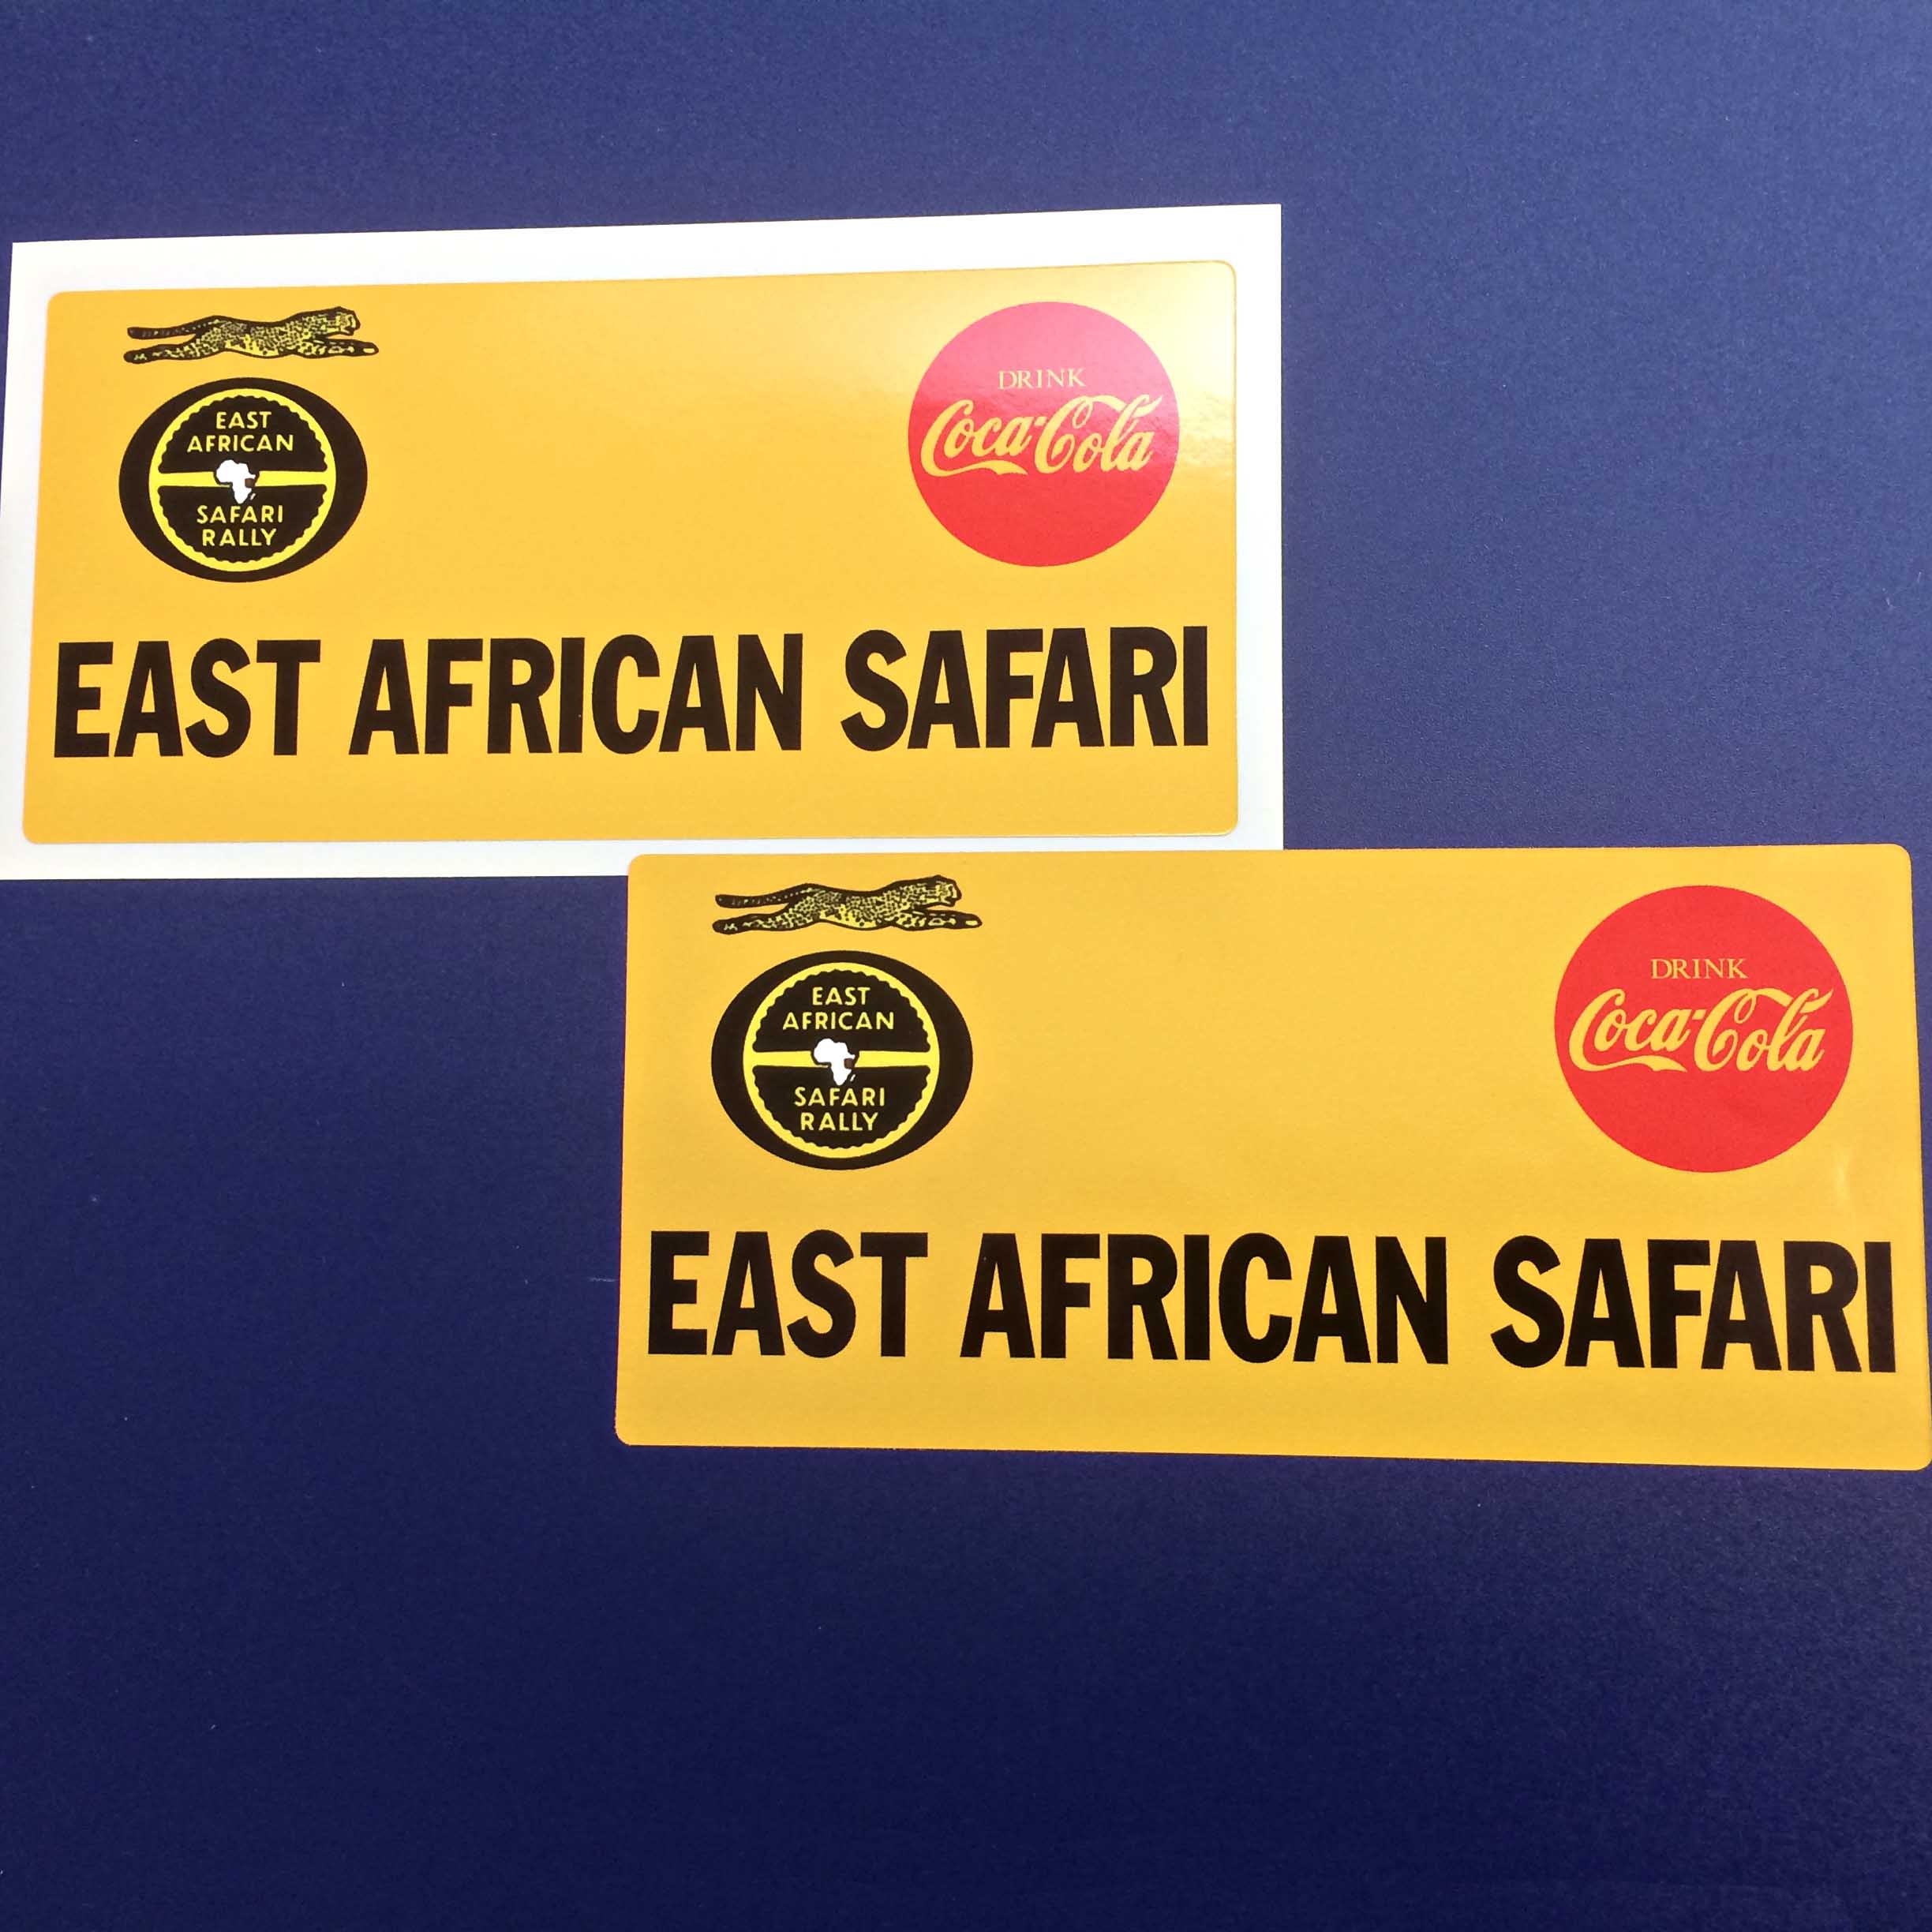 EAST AFRICAN SAFARI STICKERS. East African Safari in black lettering on a yellow sticker. Above are two logos. Drink Coca Cola in a red circle and East African Safari Rally, a leaping leopard and a yellow steering wheel with a map of Africa in the centre on a black oval.